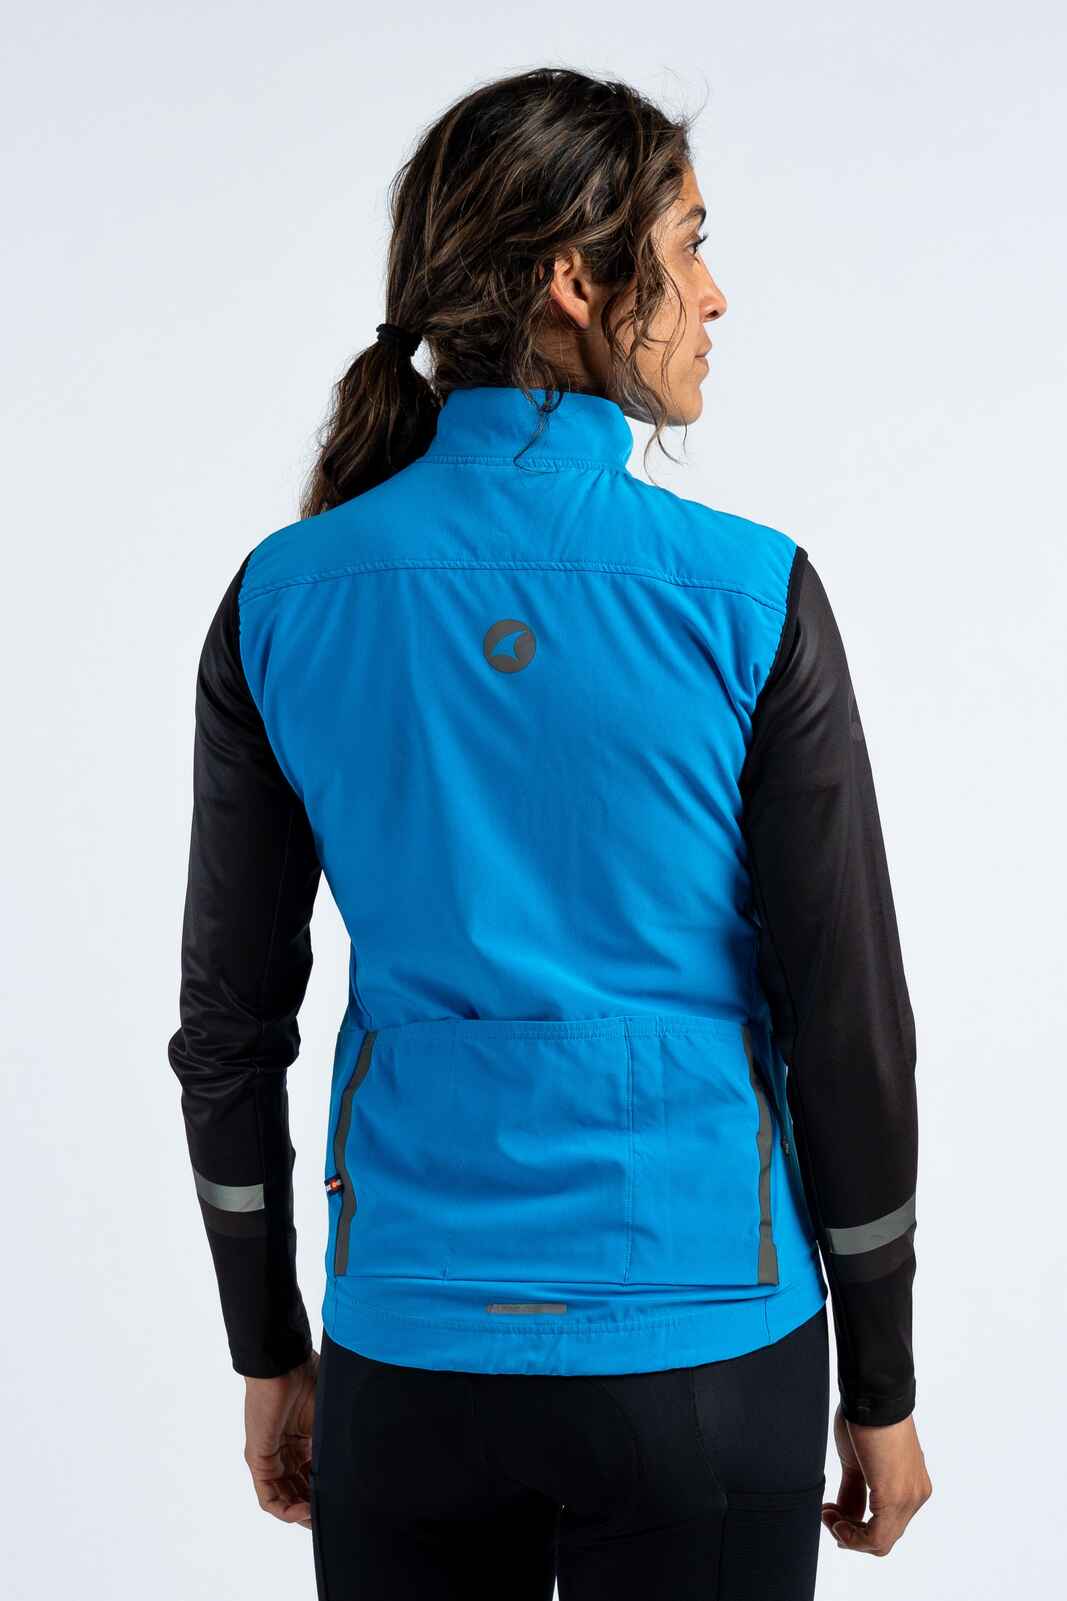 Women's Blue Thermal Cycling Vest - Alpine Back View